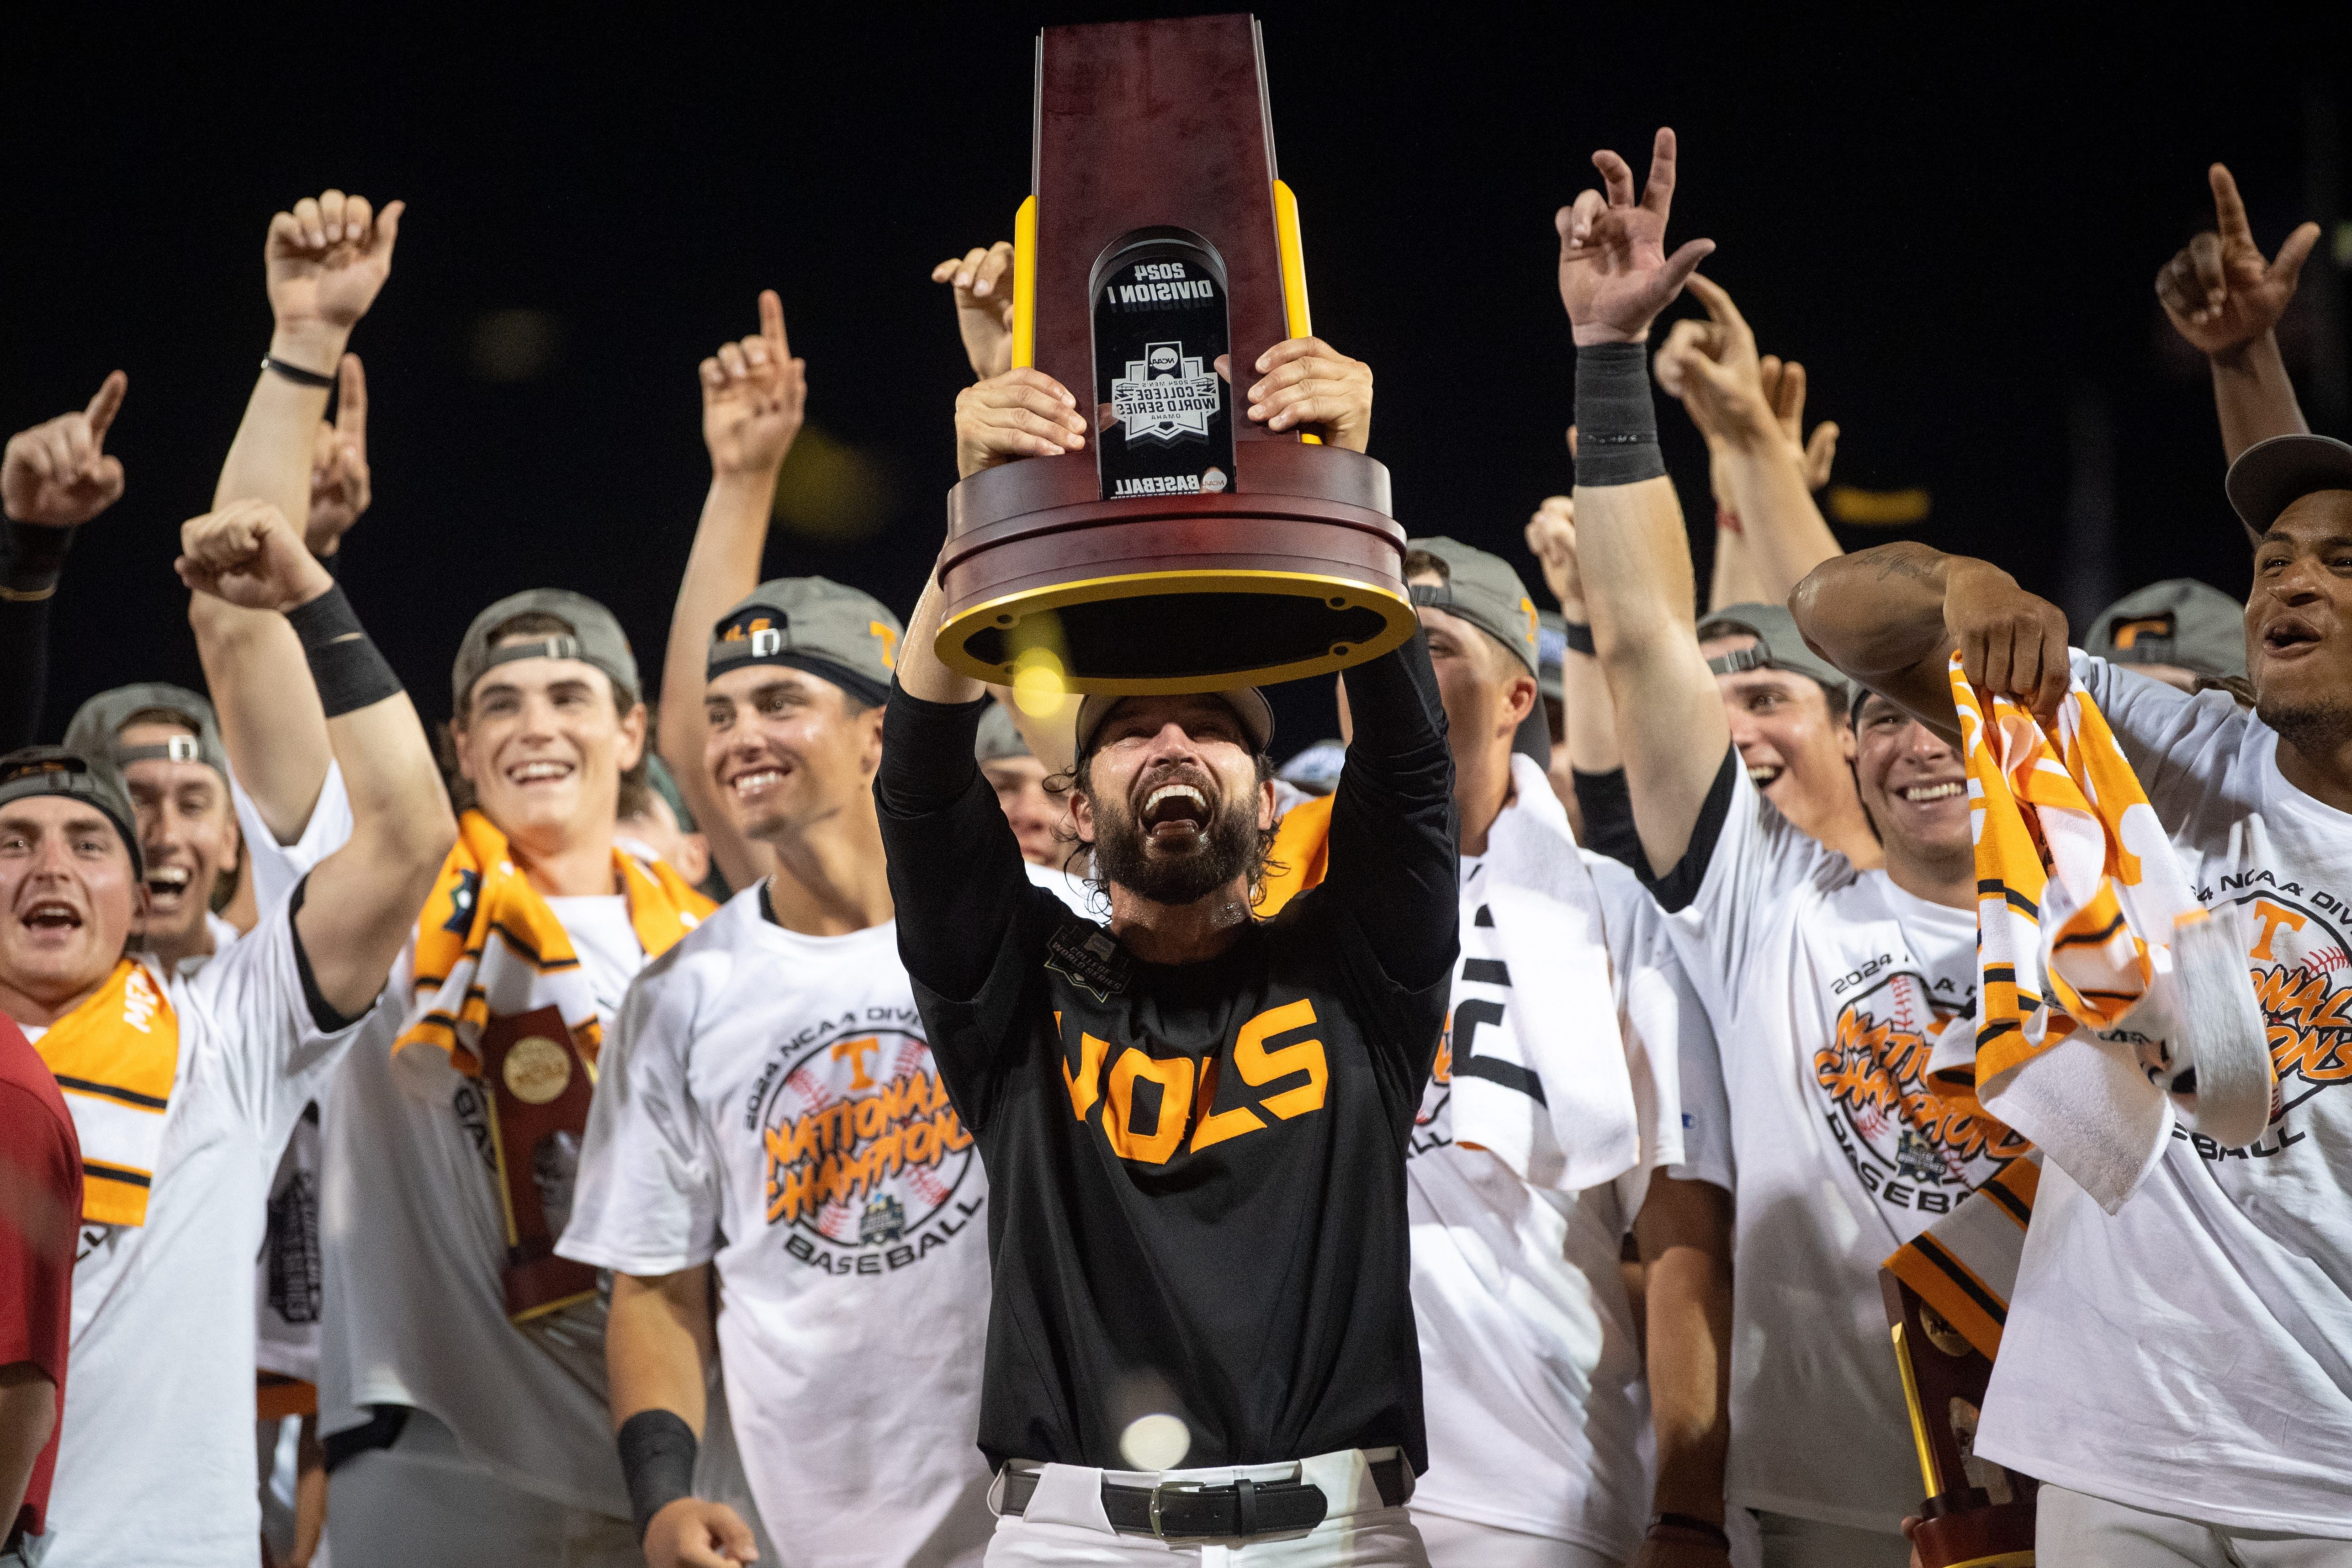 Tony Vitello led the Vols to their maiden CWS title (Credits: IMAGN)